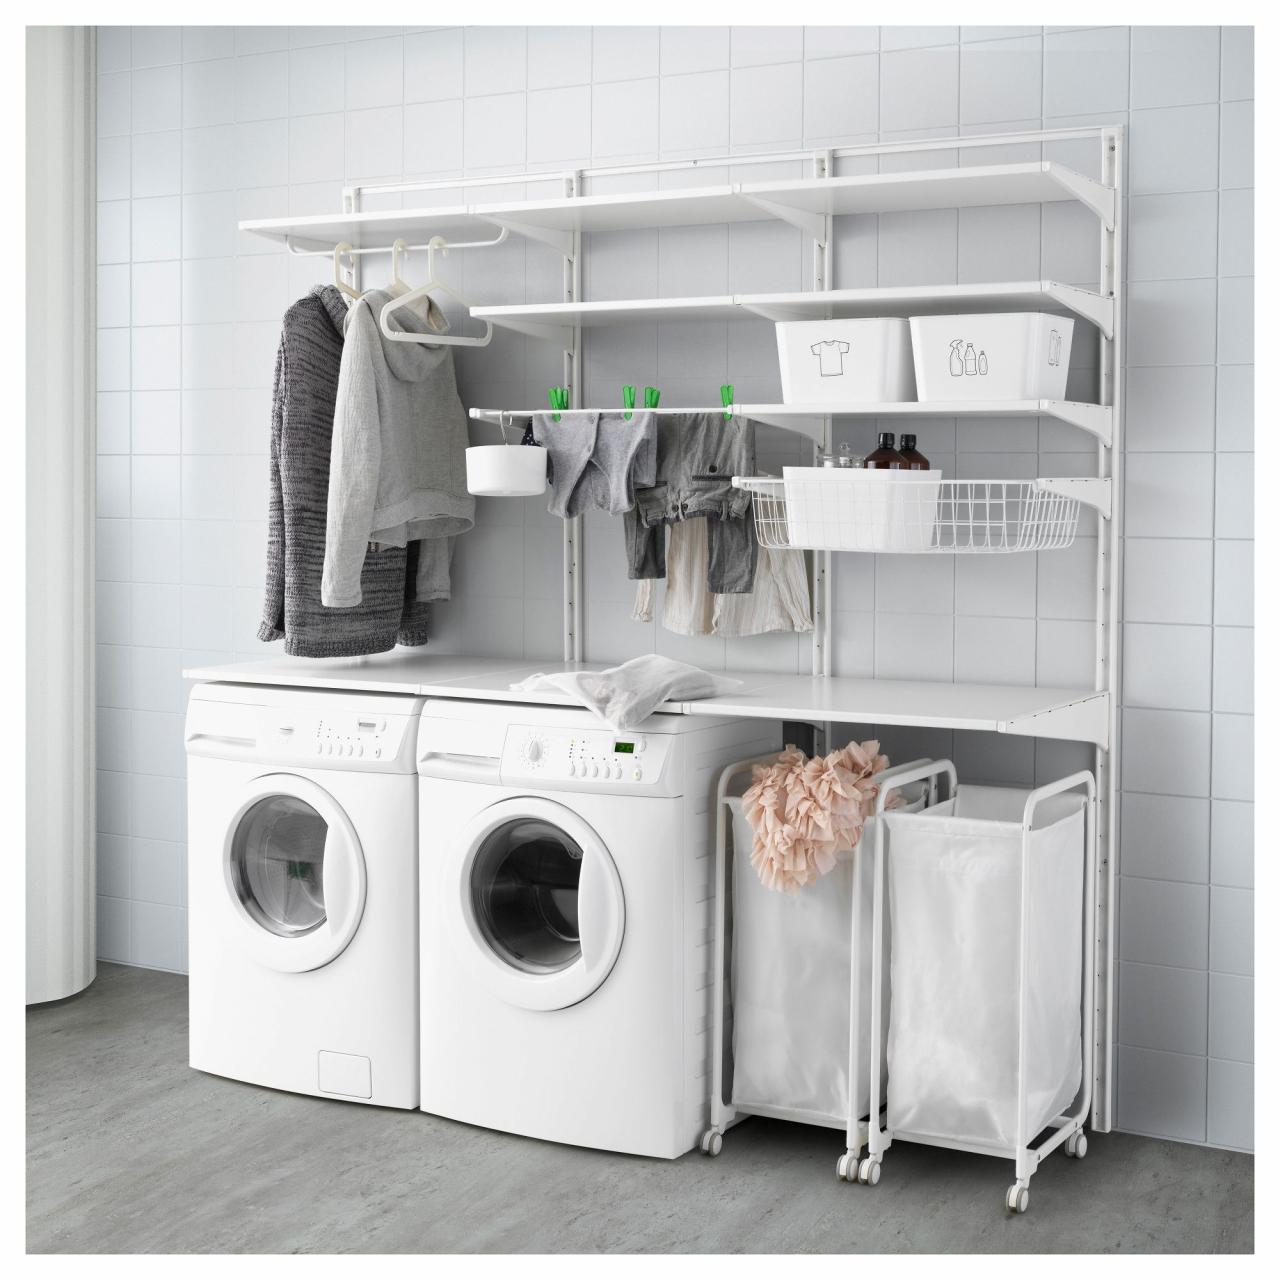 All Products Ikea laundry room, Laundry room storage, Laundry room design